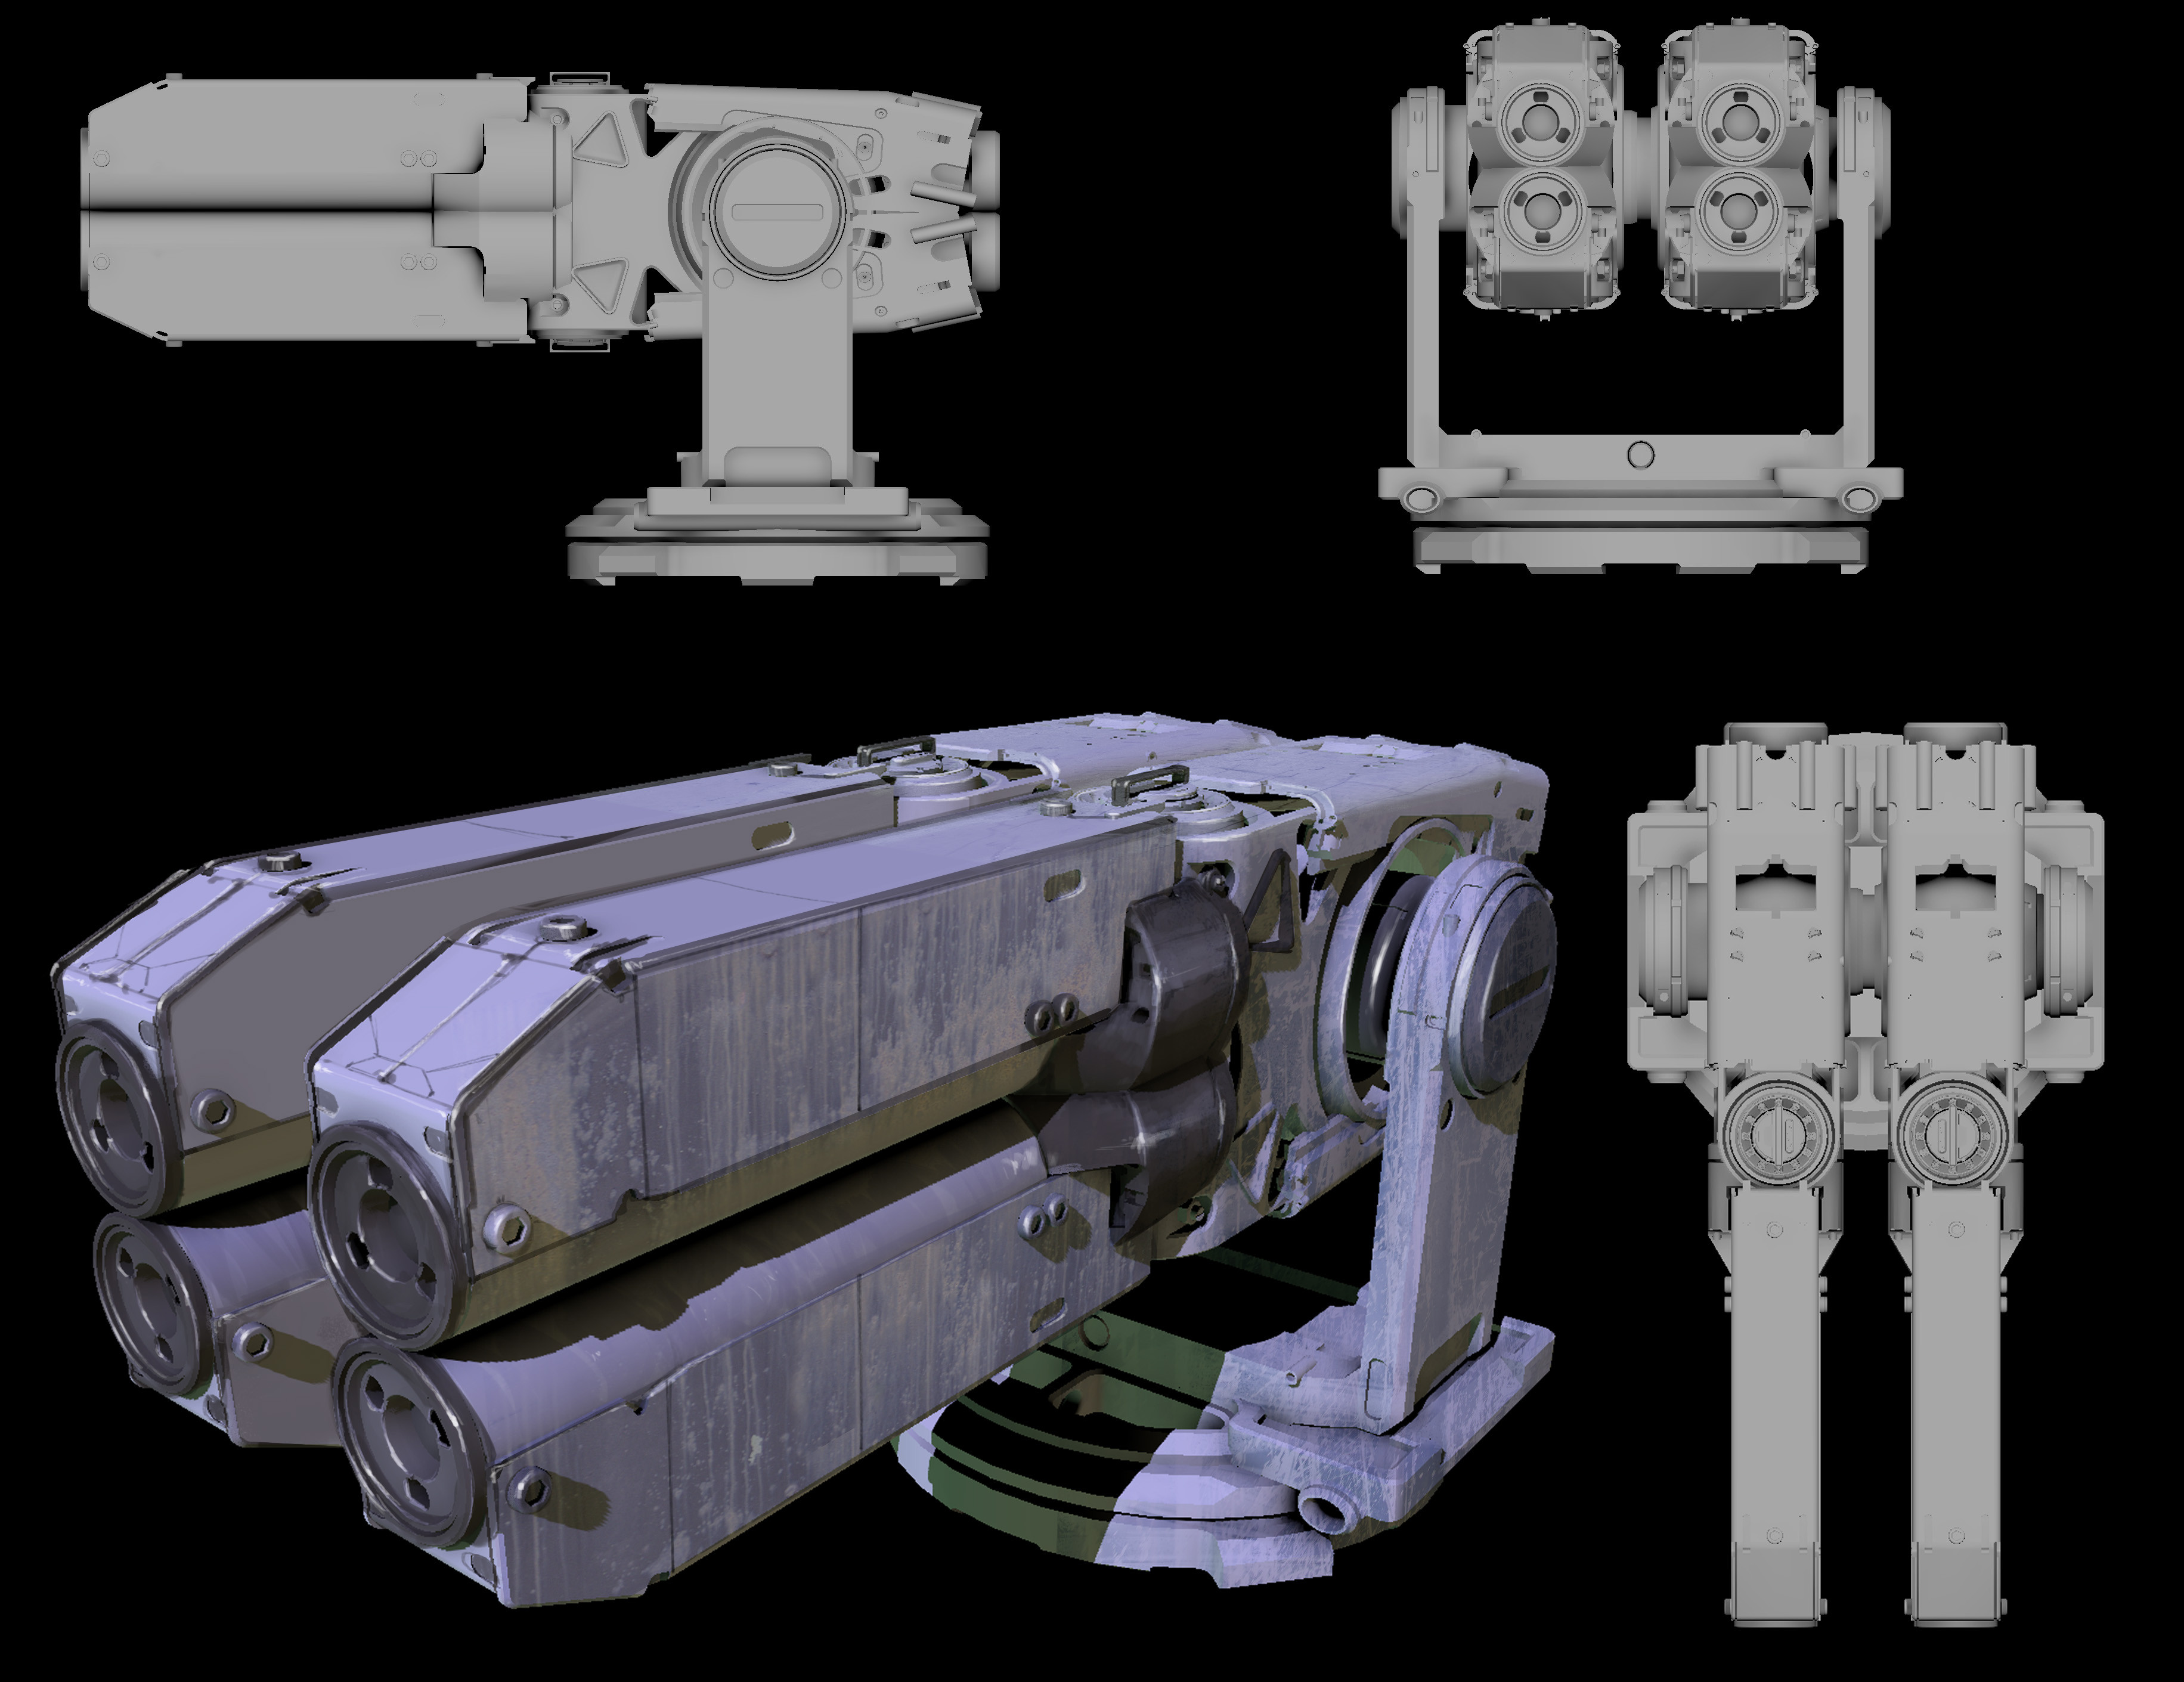 Kitbashed turret concept. I dont think this ever got used though :/